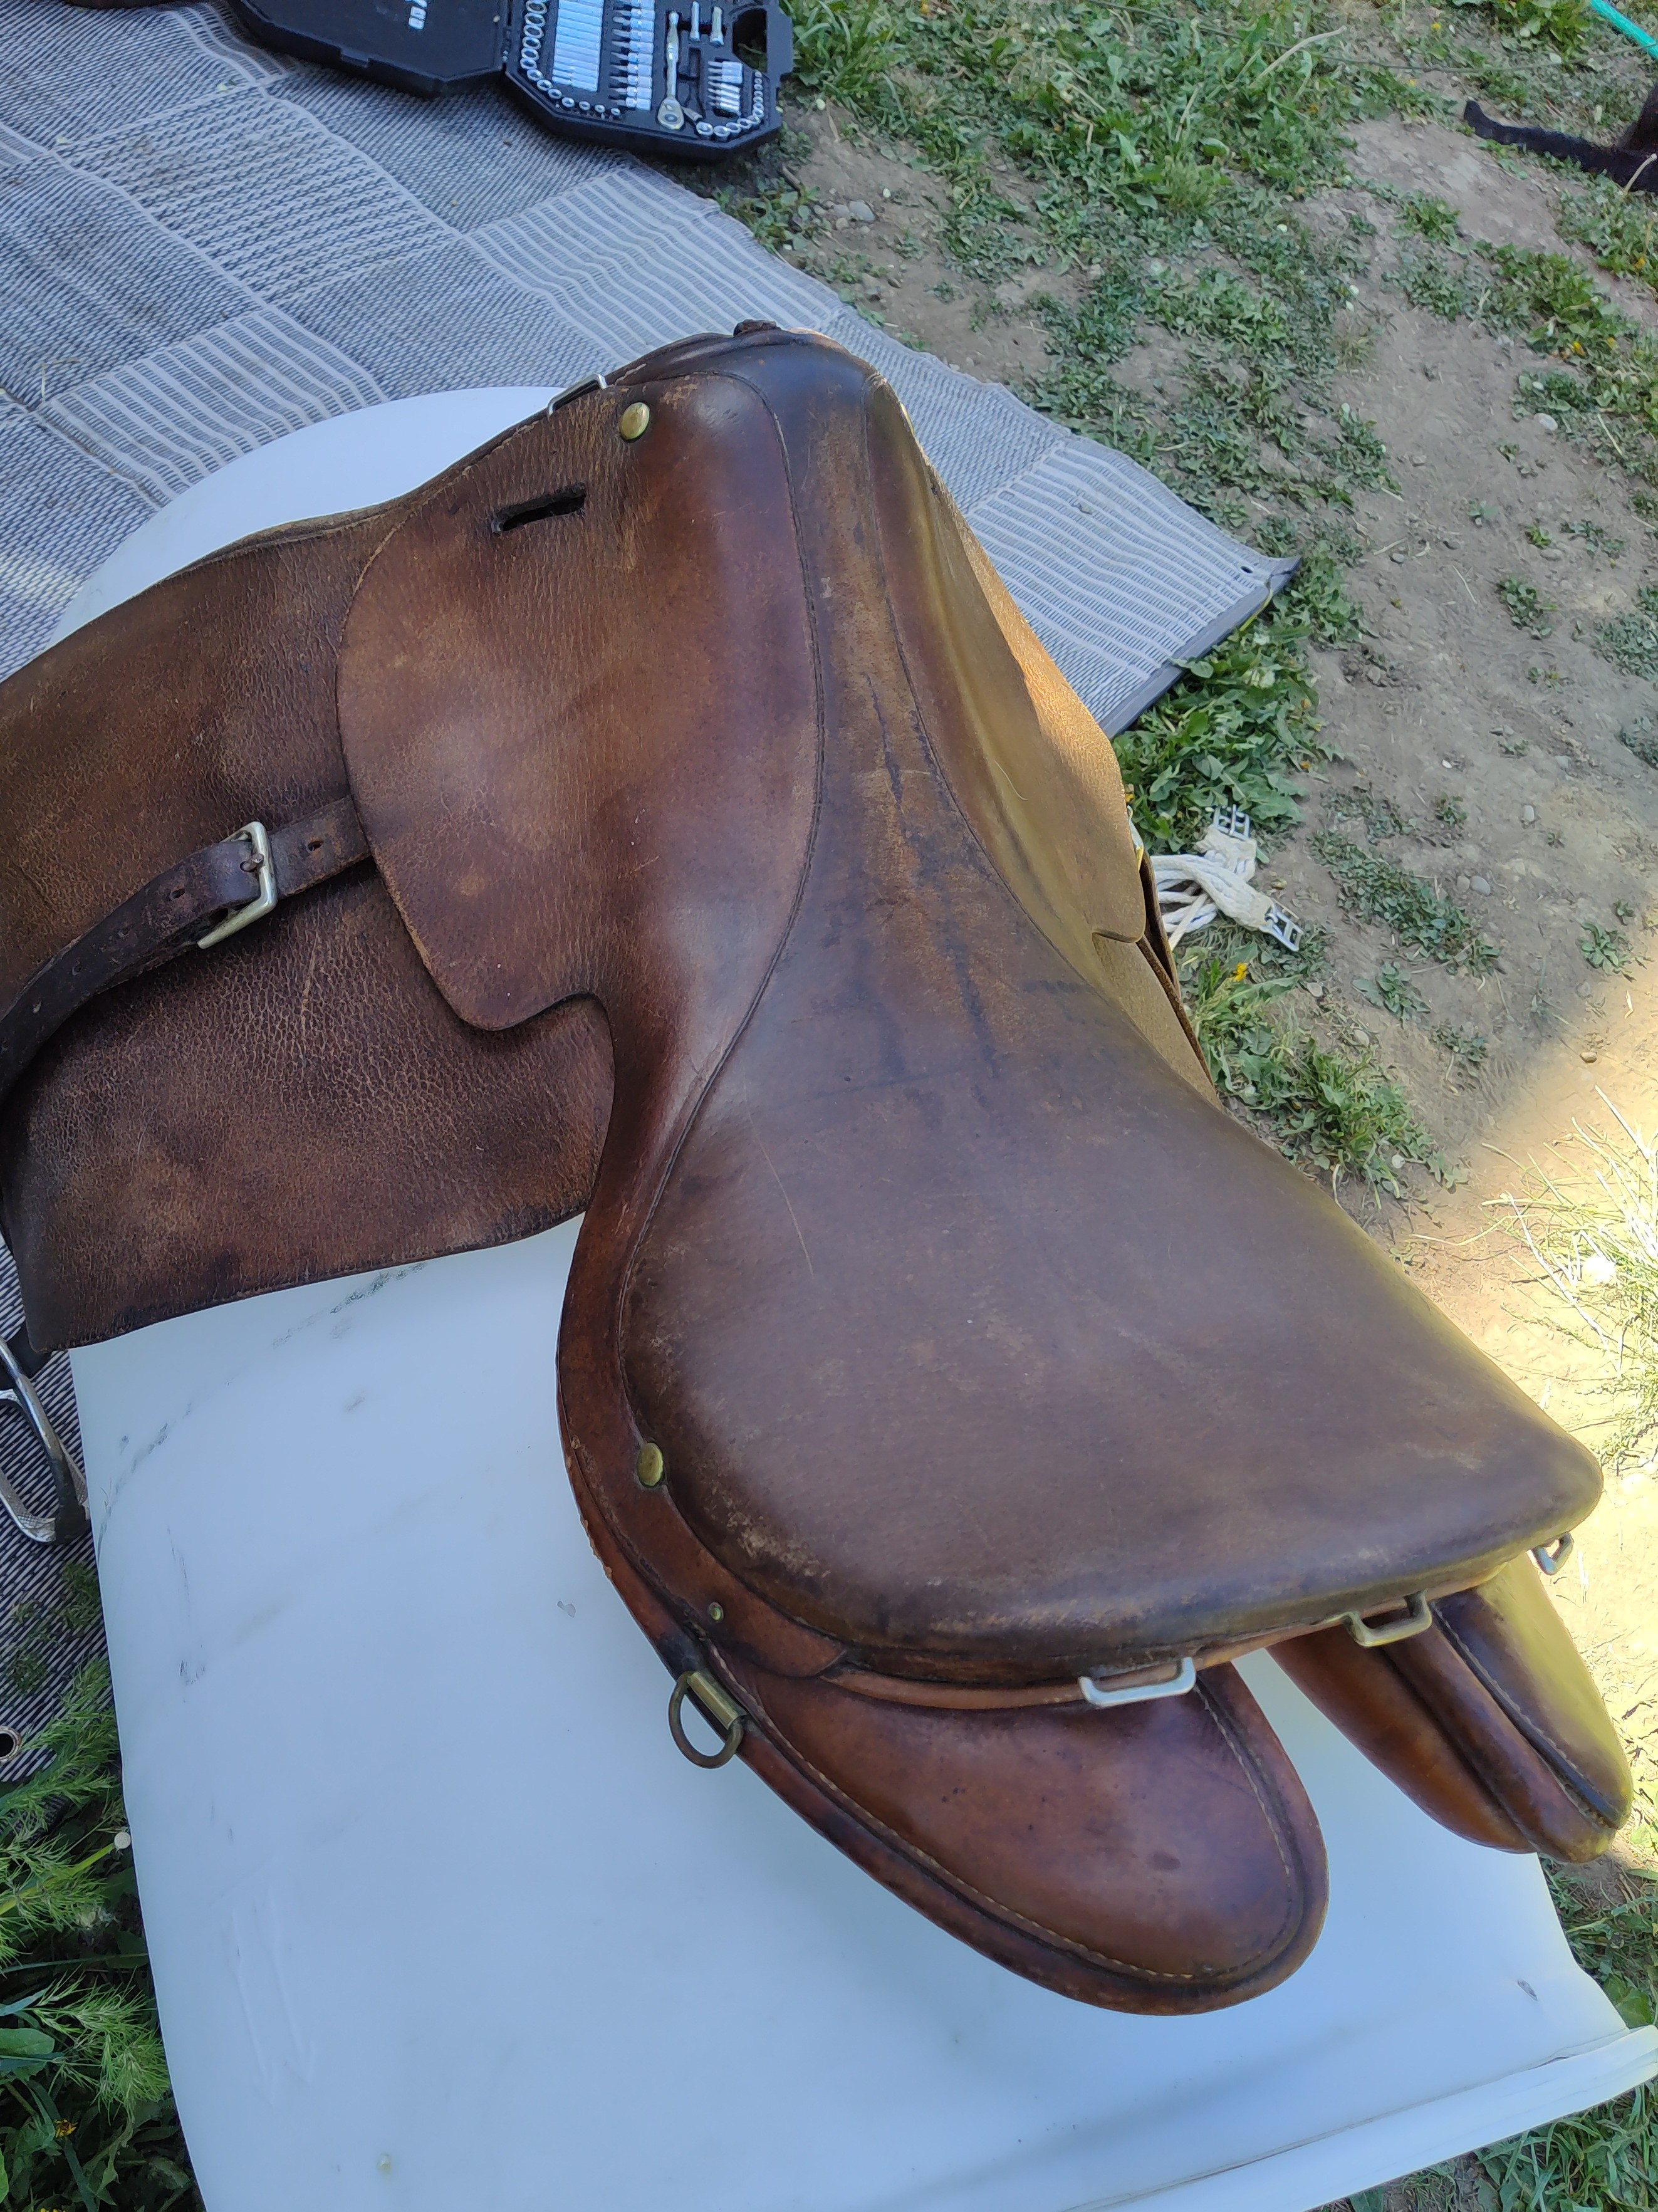 Used as a pattern H Marquis Saddle ?